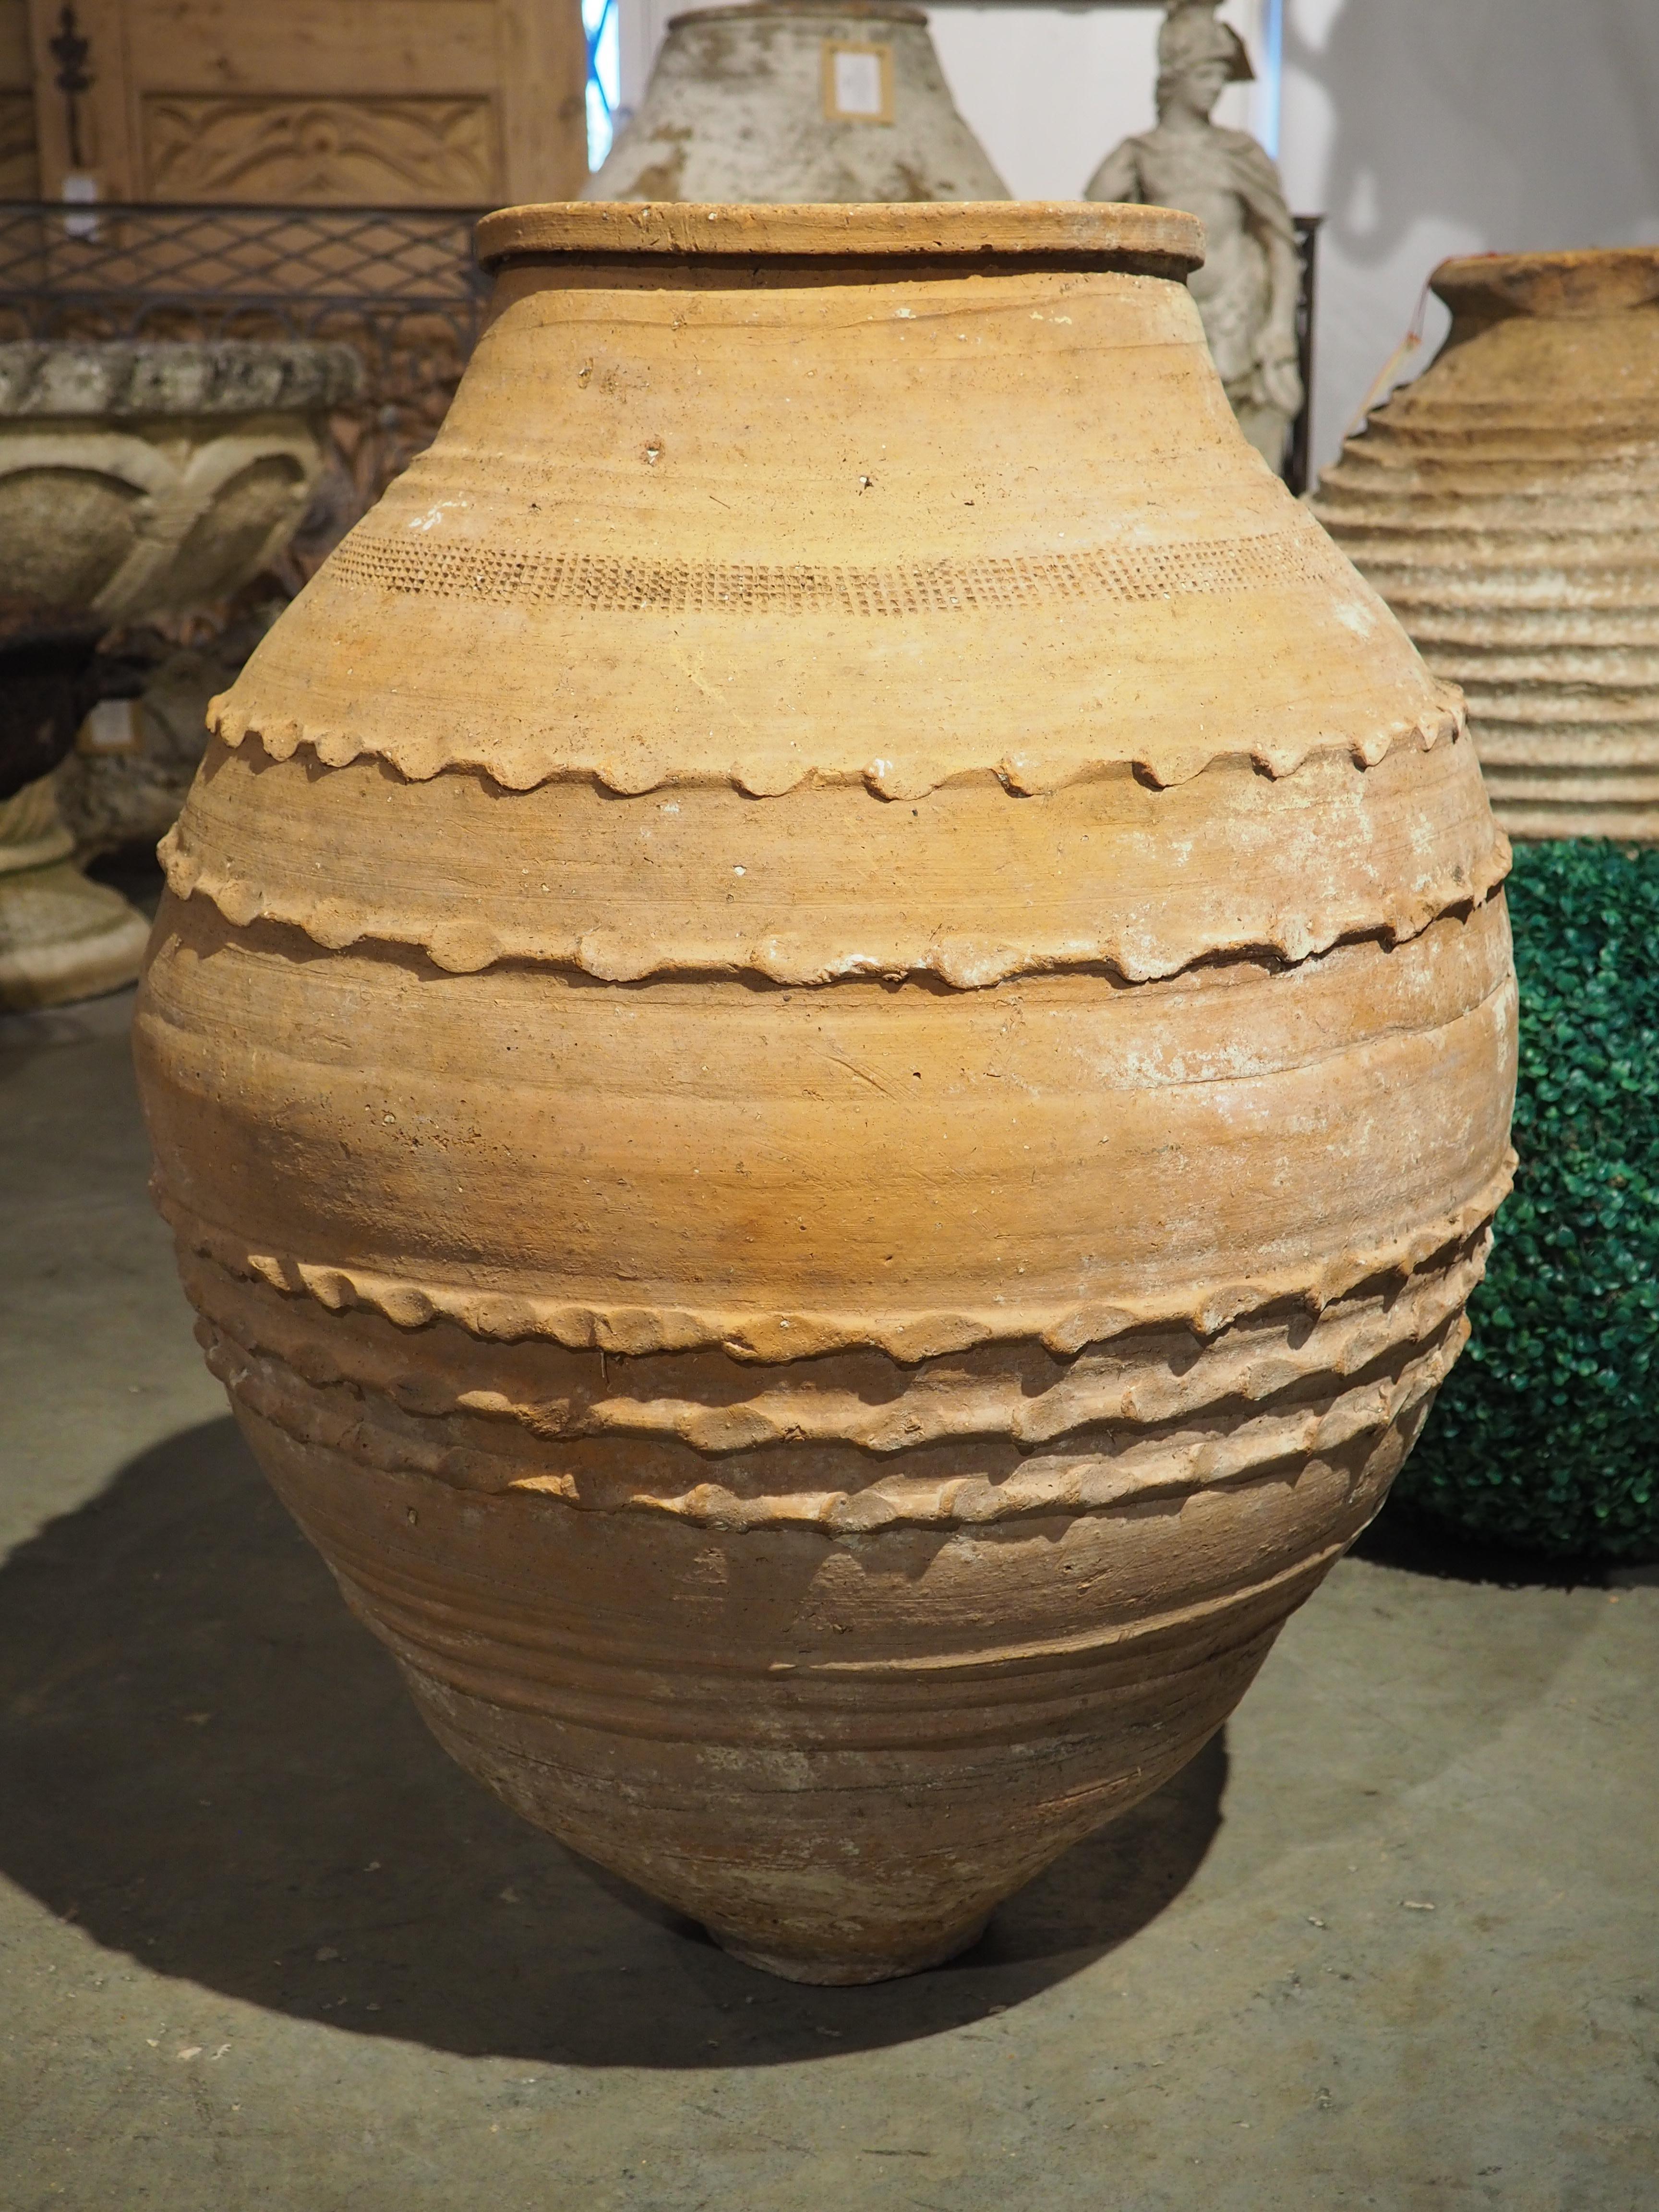 Vessels such as this large grain or olive oil pot have been used for centuries throughout Greece to keep culinary ingredients fresh. Ours dates to the 1800s and has a form known as a koroniotiko, as the initial pots originated in the town of